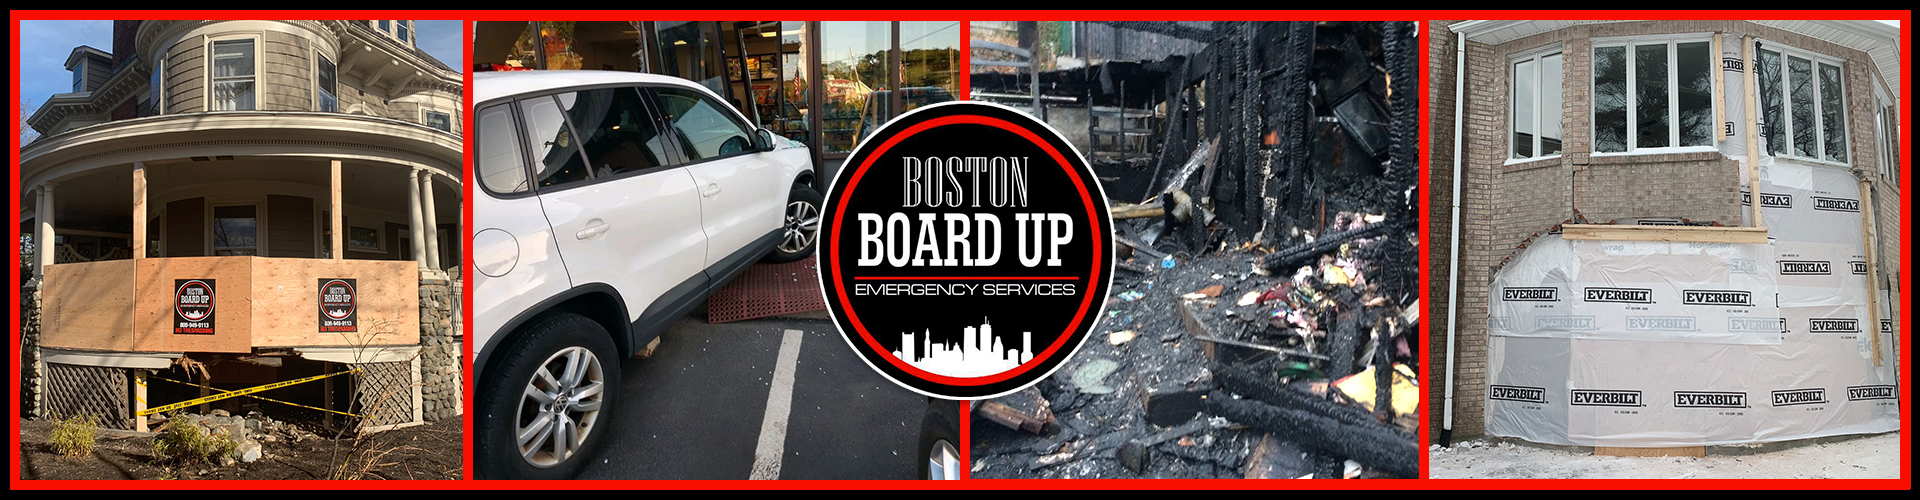 Boston Board Up: Emergency Board Up Services